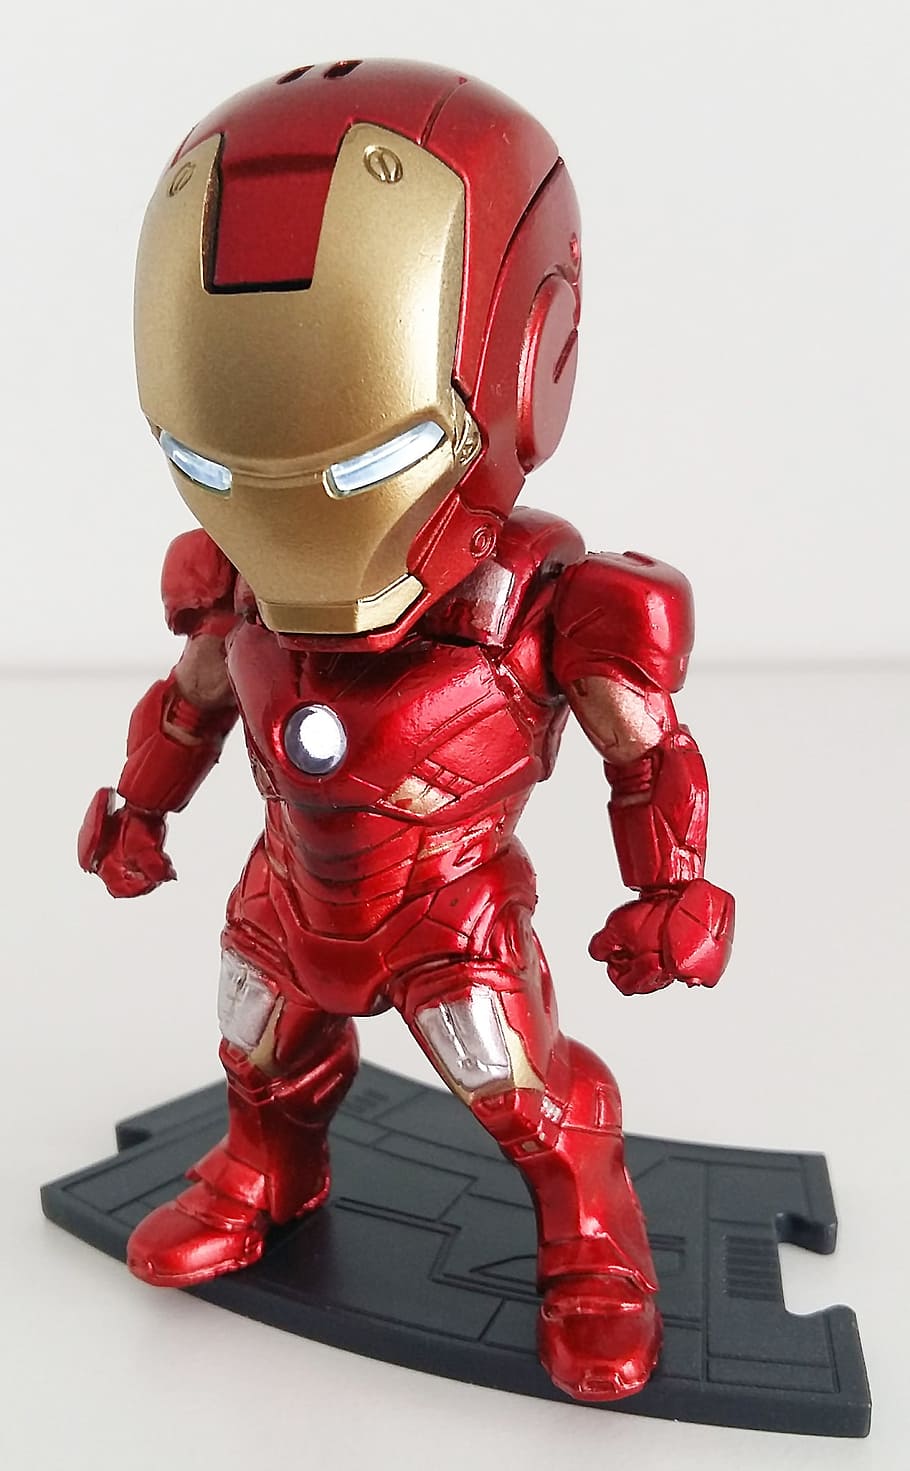 action figure, collect, figures, toys, collectibles, iron man